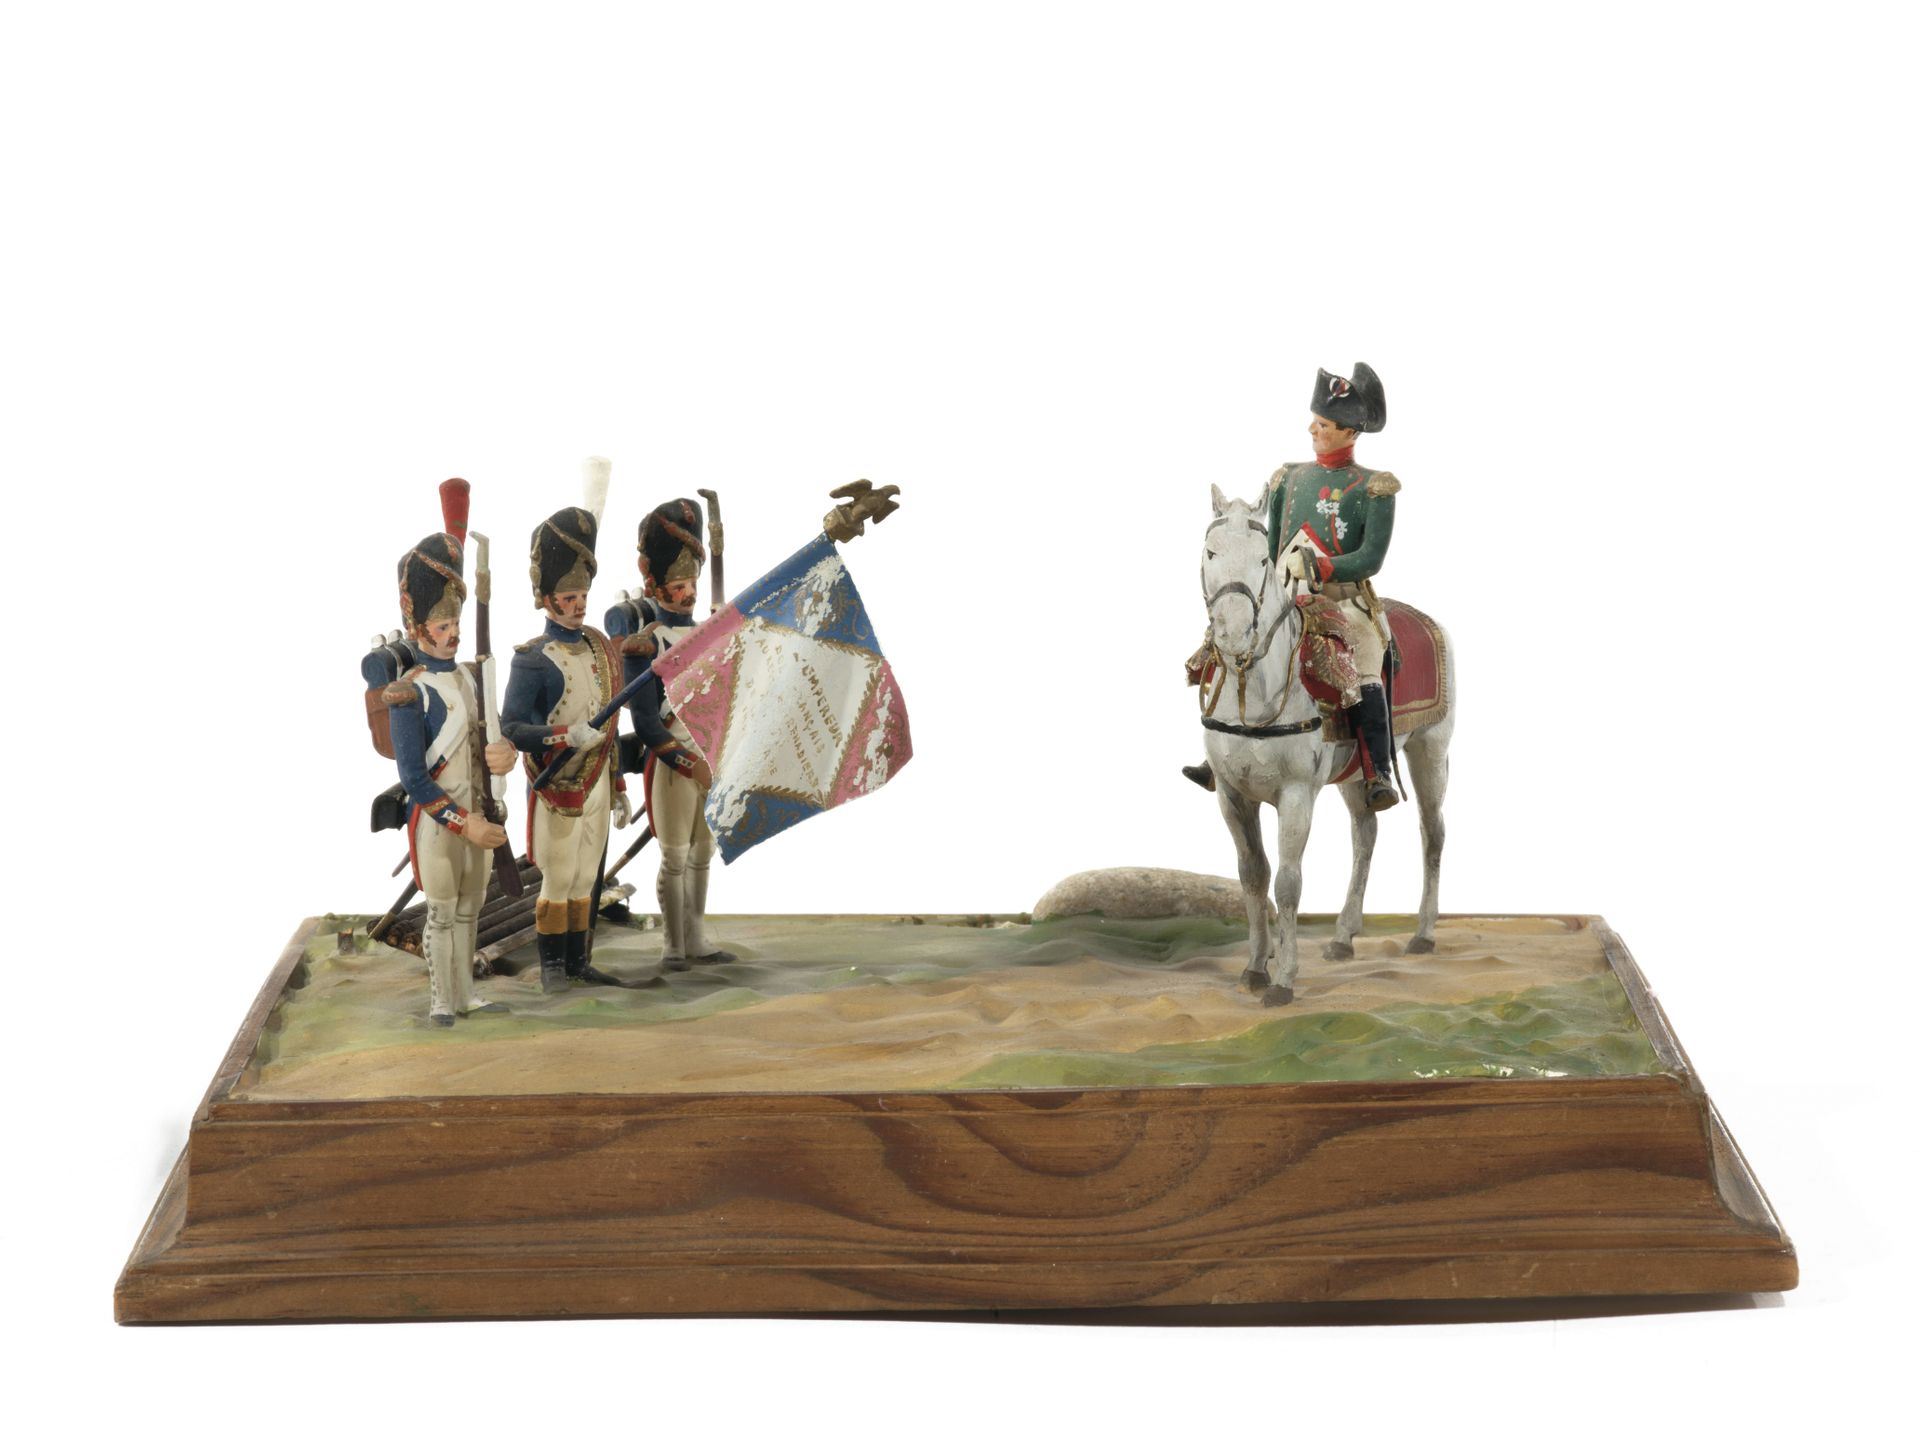 Null Métayer. The Emperor in Chasseurs à cheval uniform, salutes the flag of the&hellip;